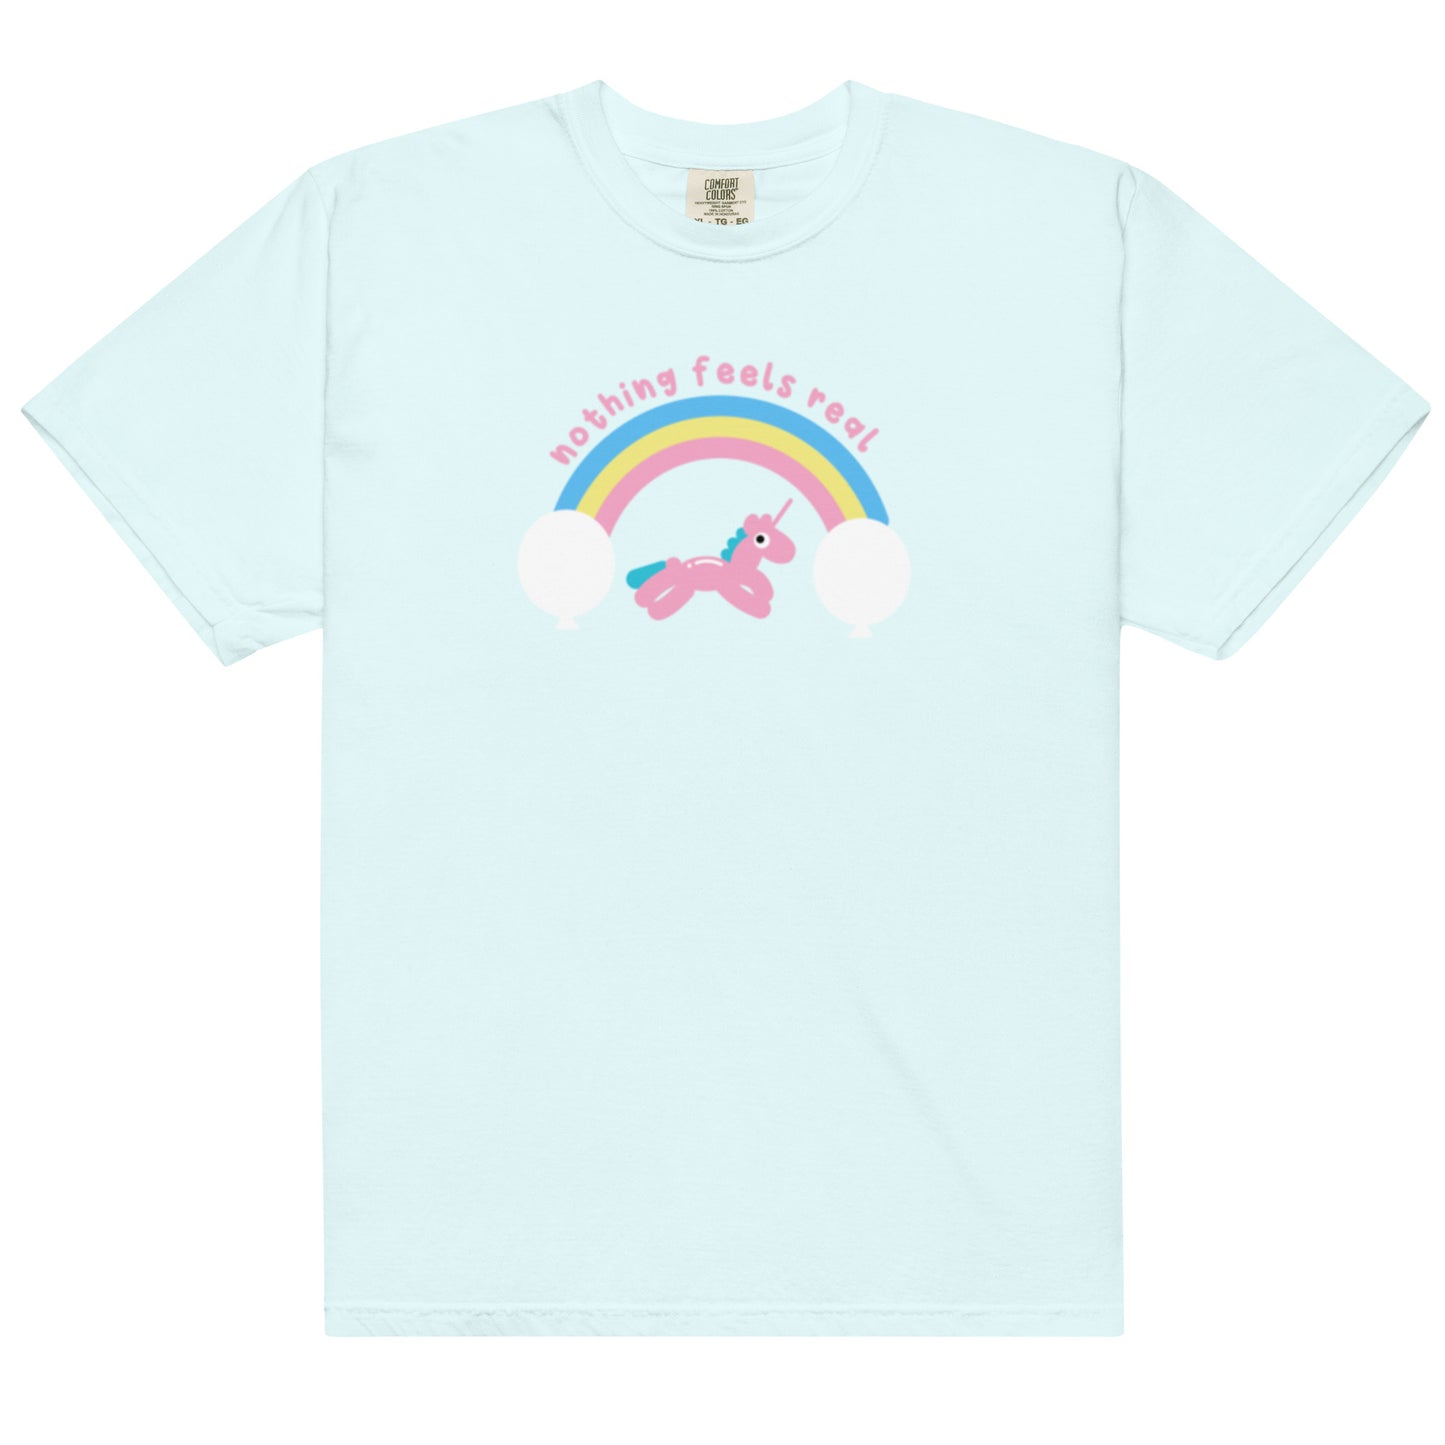 Nothing Feels Real Existential Crisis Unicorn Balloon Animal S-4XL Unisex Comfort Colors T-Shirt